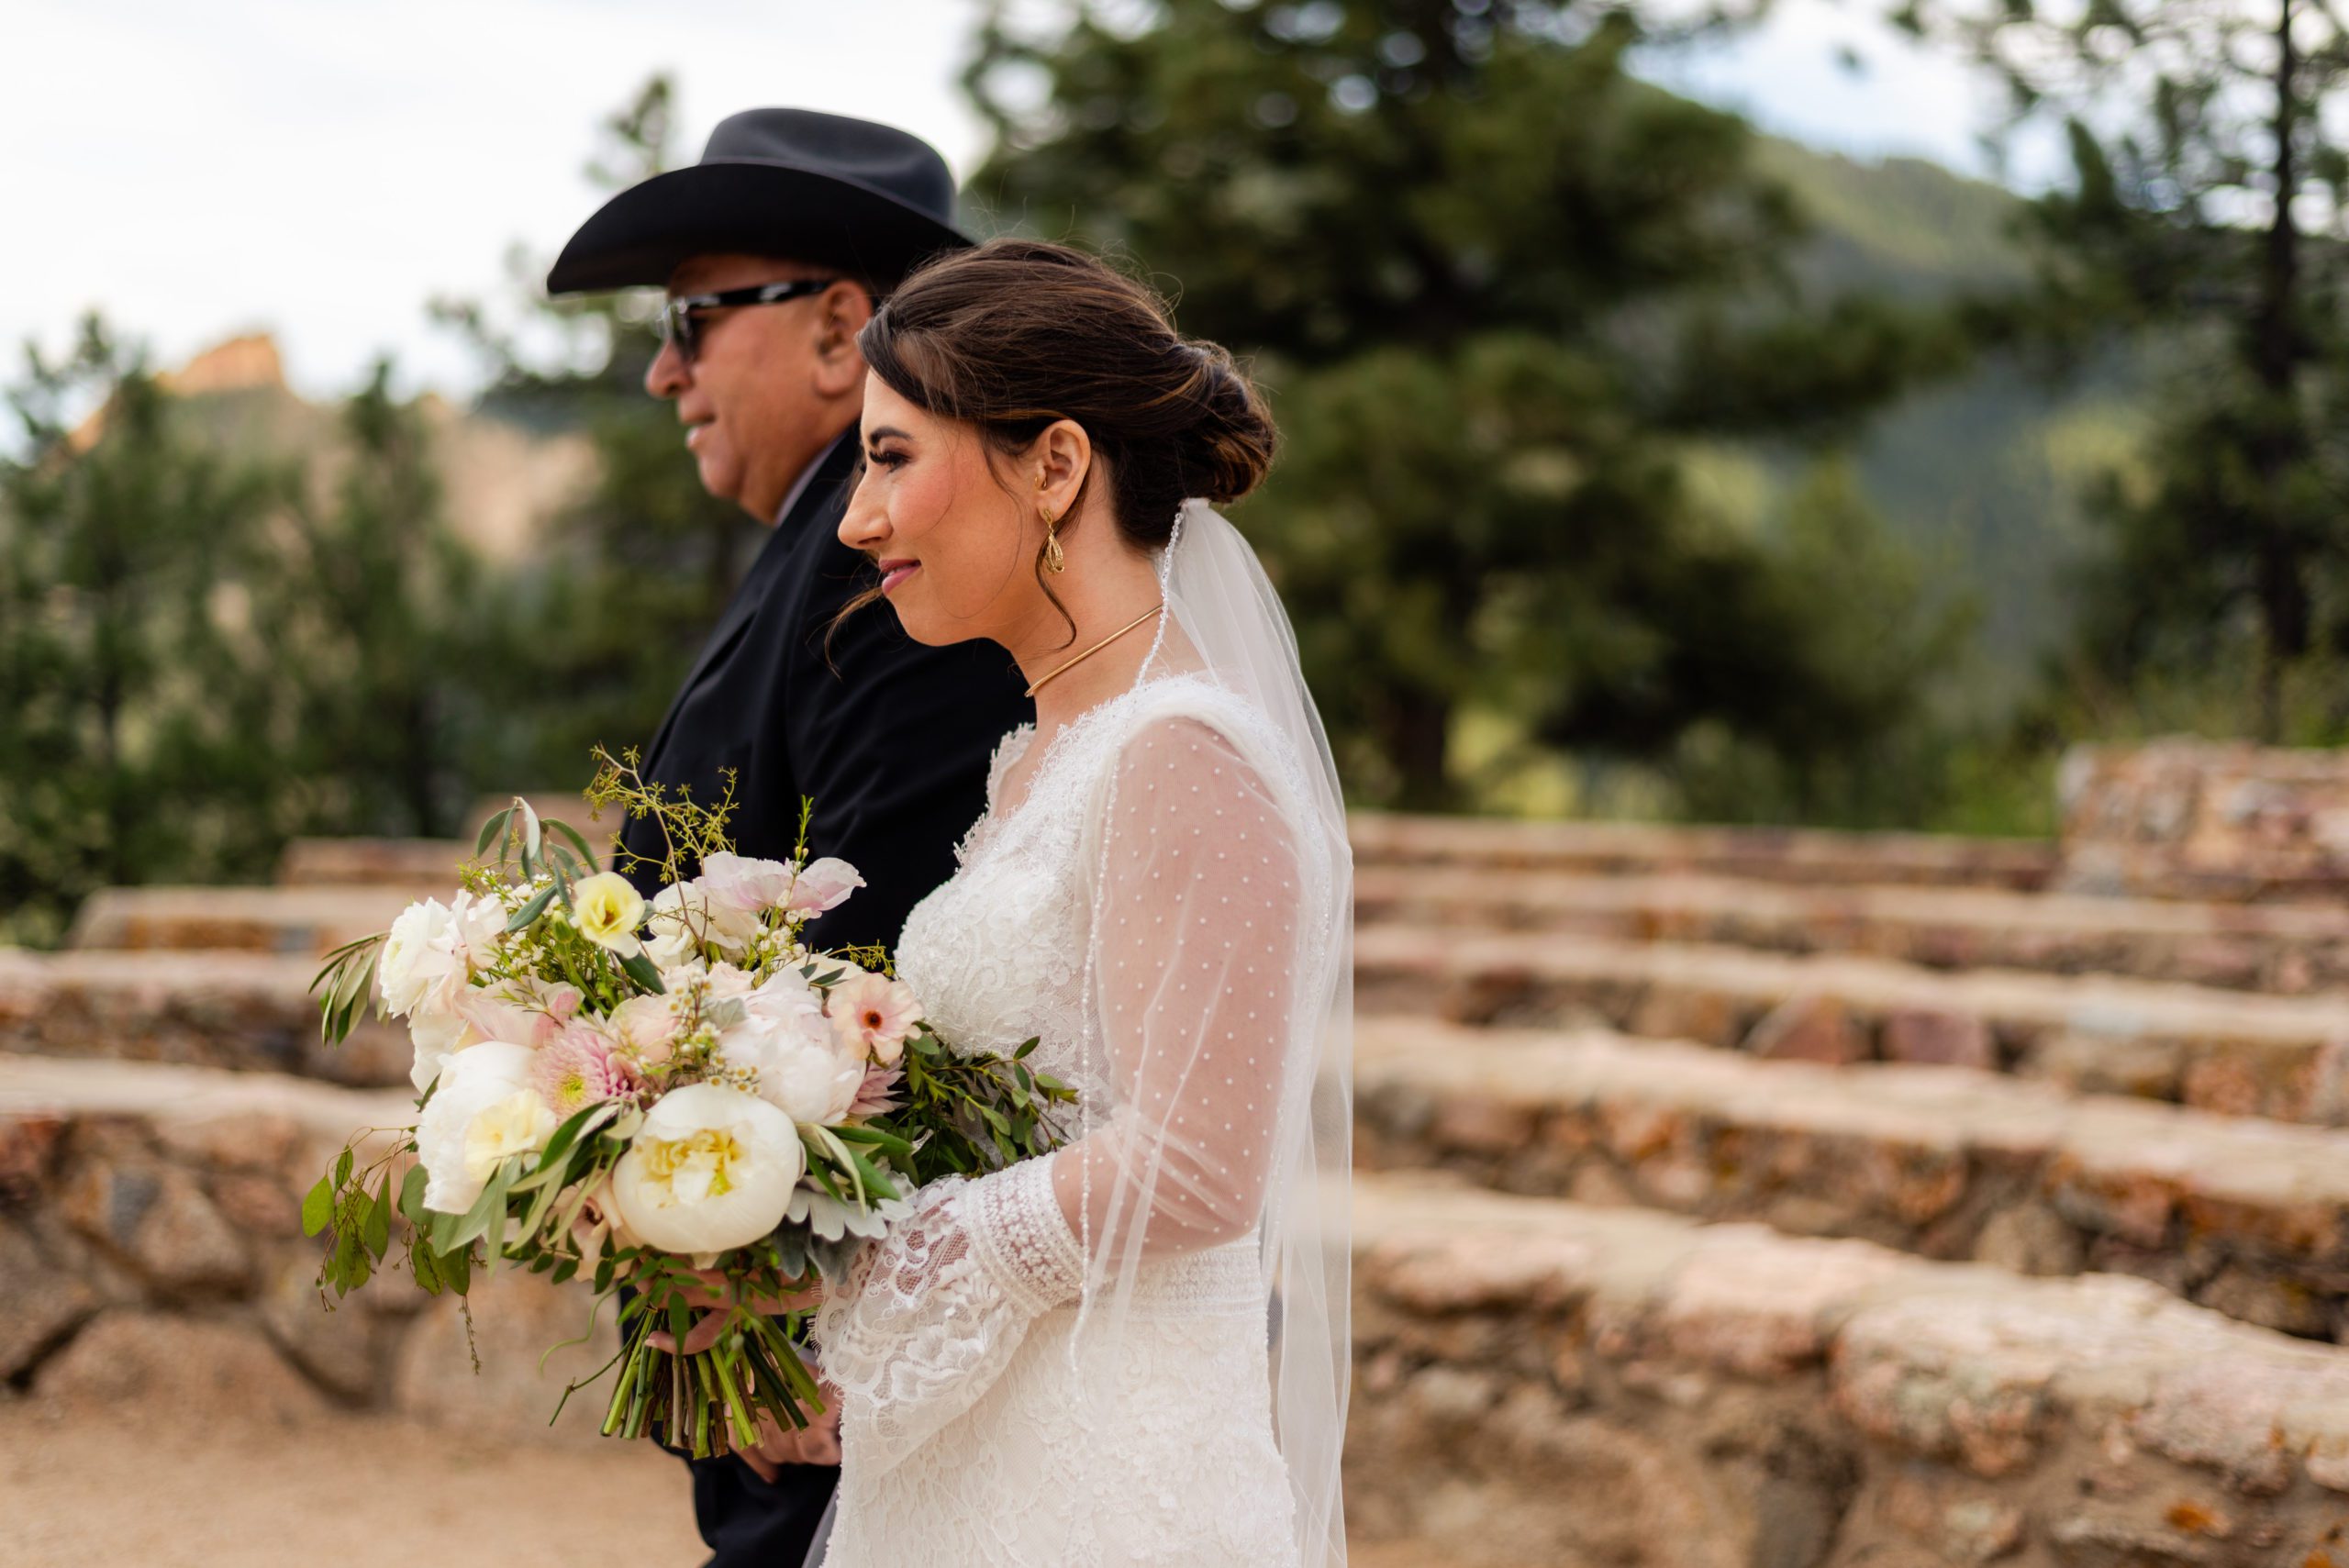 The bride and her father walk together at Sunrise Amphitheater.